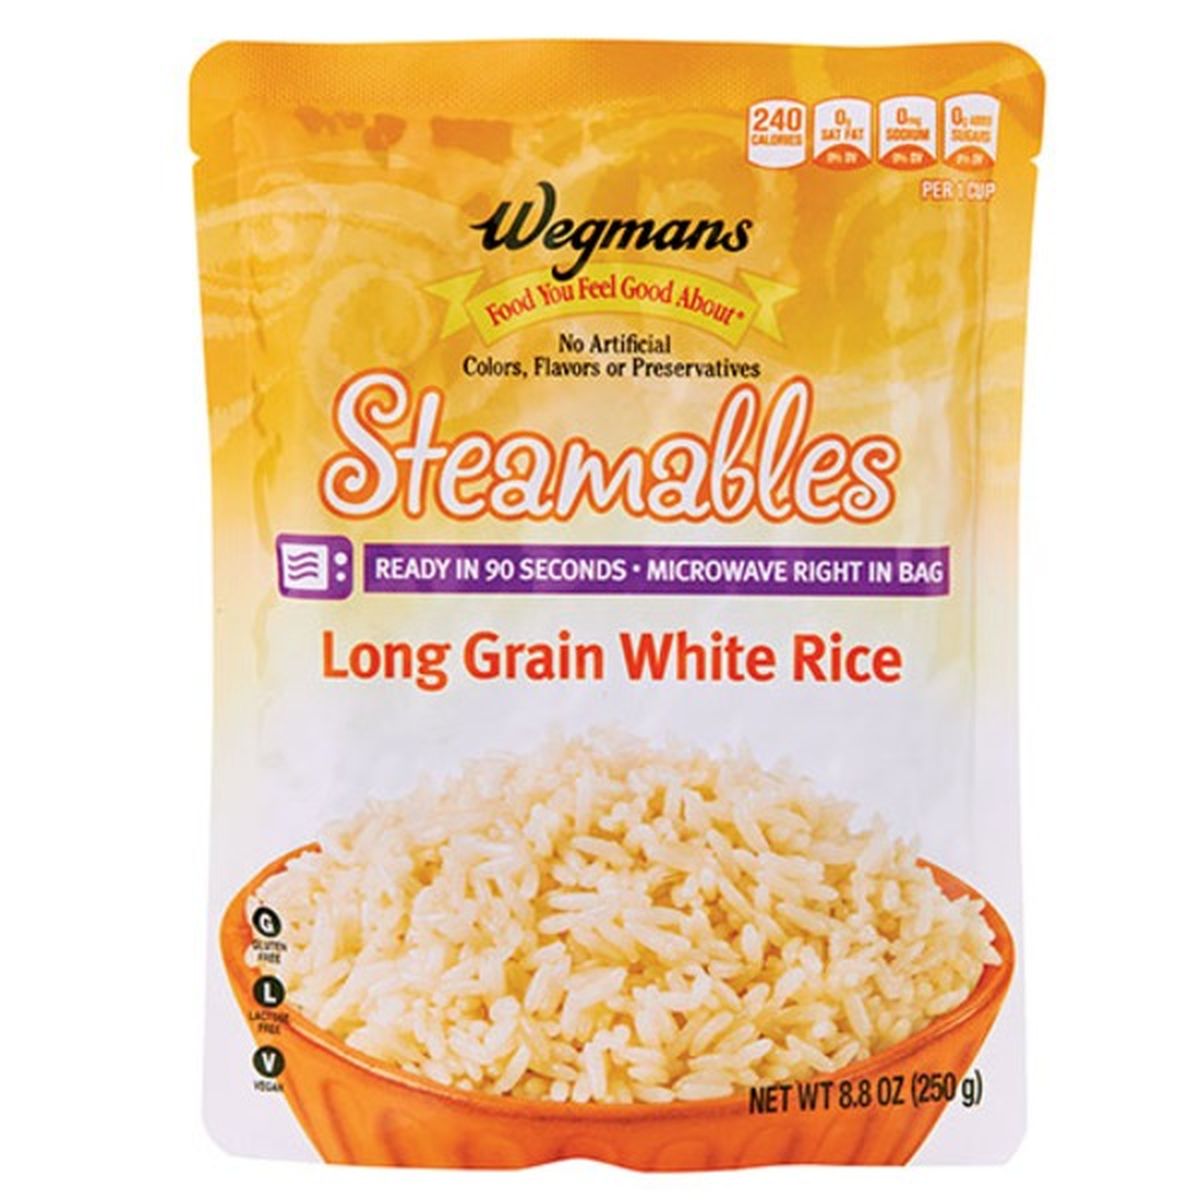 Calories in Wegmans White Rice Steamables